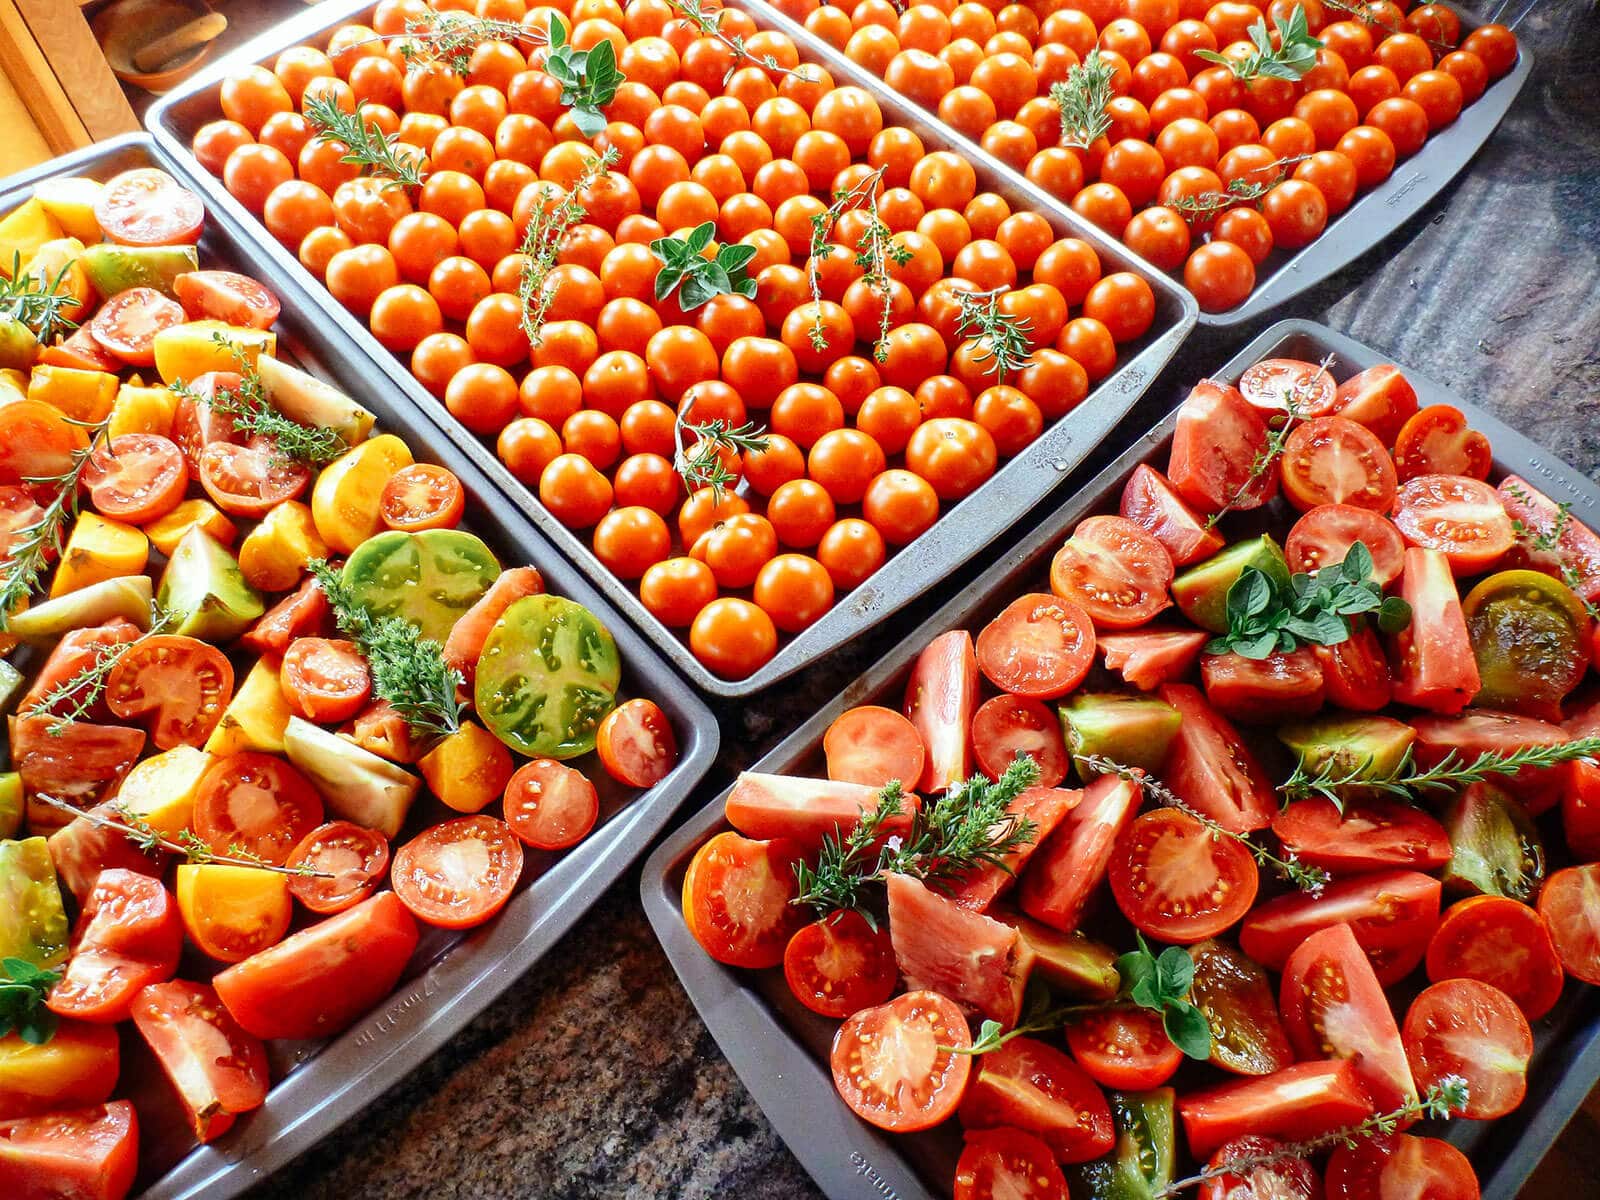 Four baking sheets filled with whole cherry tomatoes and sliced tomatoes with sprigs of fresh herbs on top